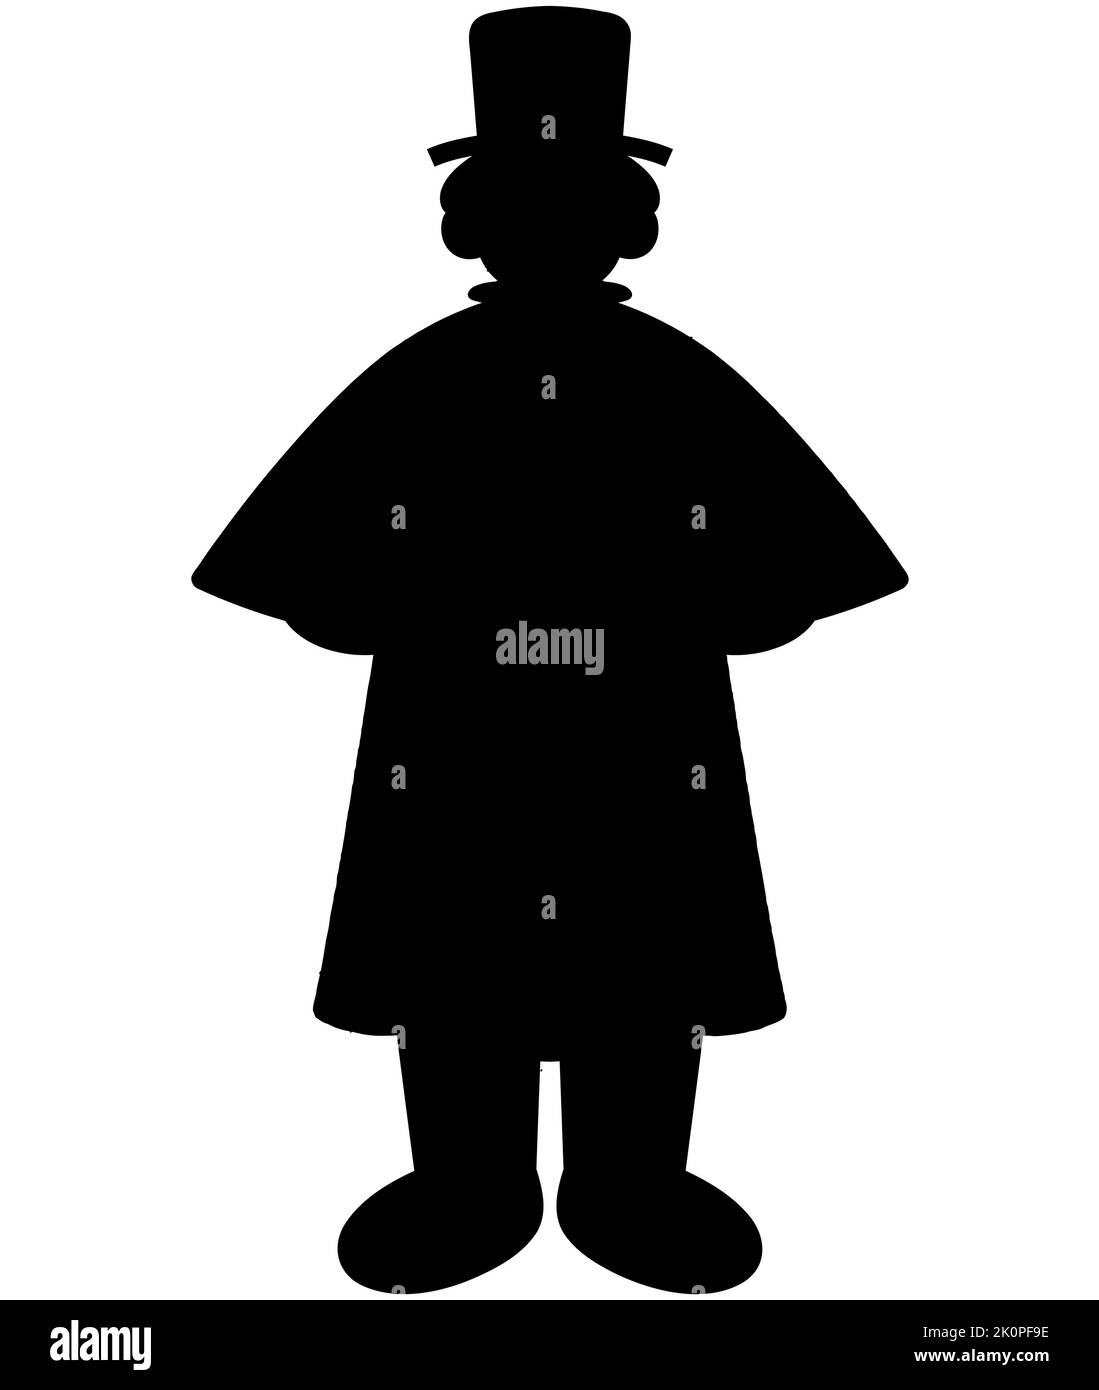 Black silhouette of a man with a long coat and a cap, a gentleman, clown, or magician figure Stock Vector